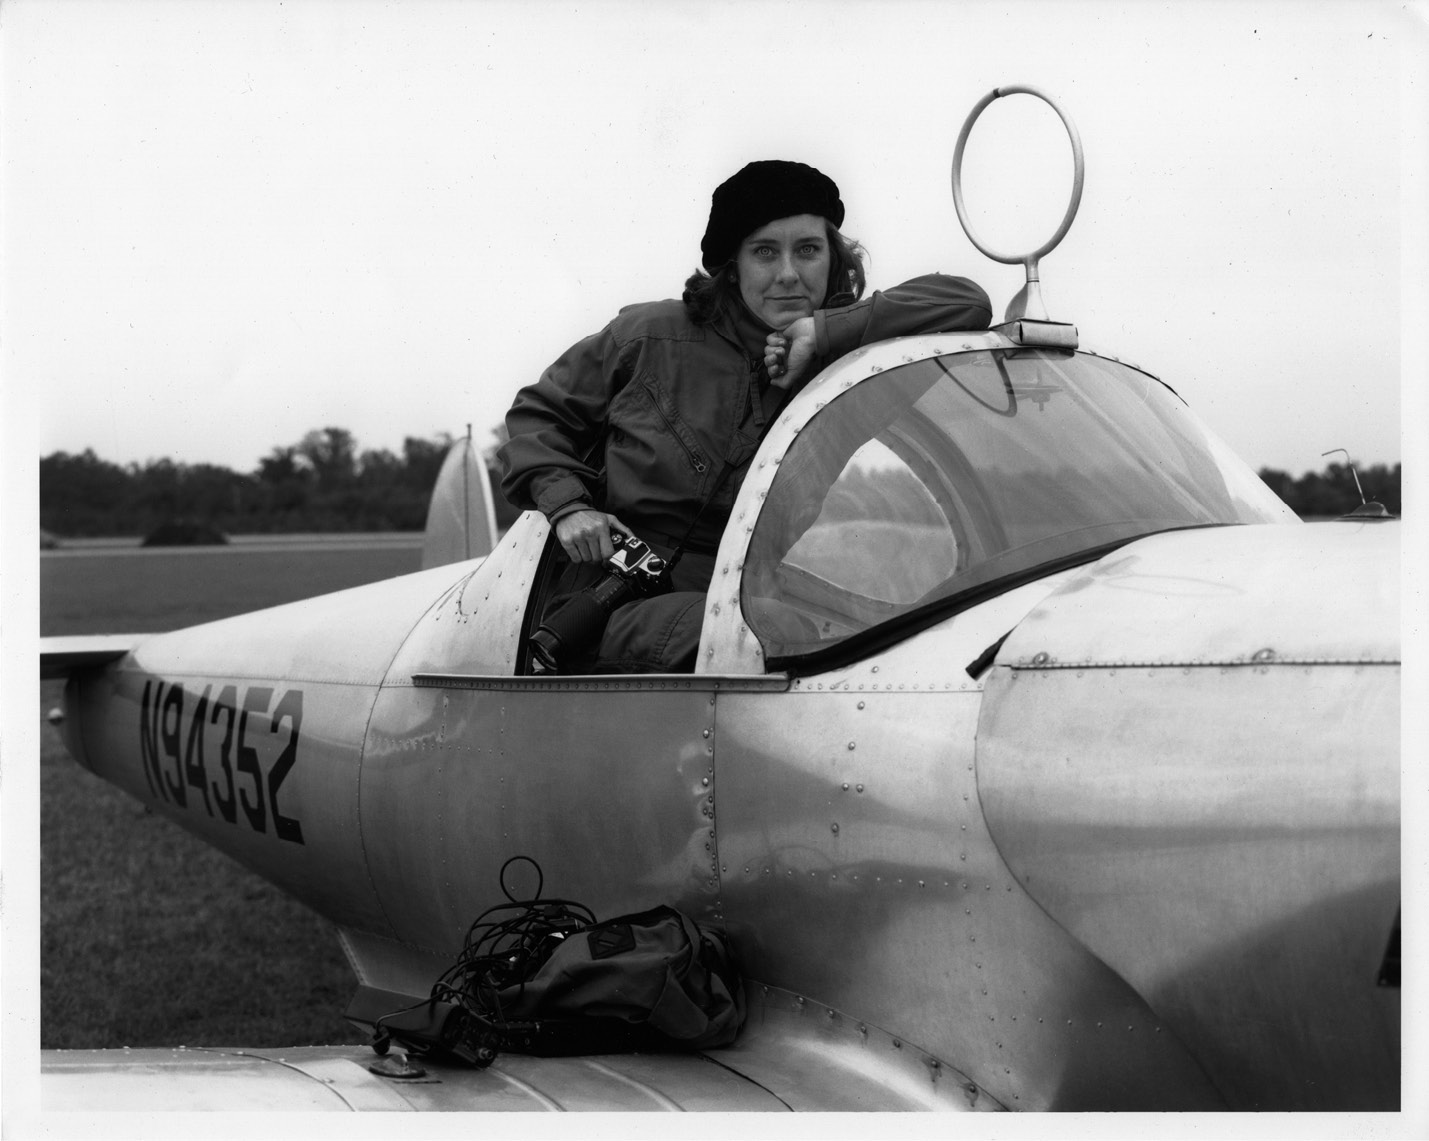 Undaunted: “If I don’t get into a place I want to go, I go knock on another door,” says the fearless Fraser, whose master pilot father took her flying in his 1946 Ercoupe; photograph courtesy of Mary Edna Fraser